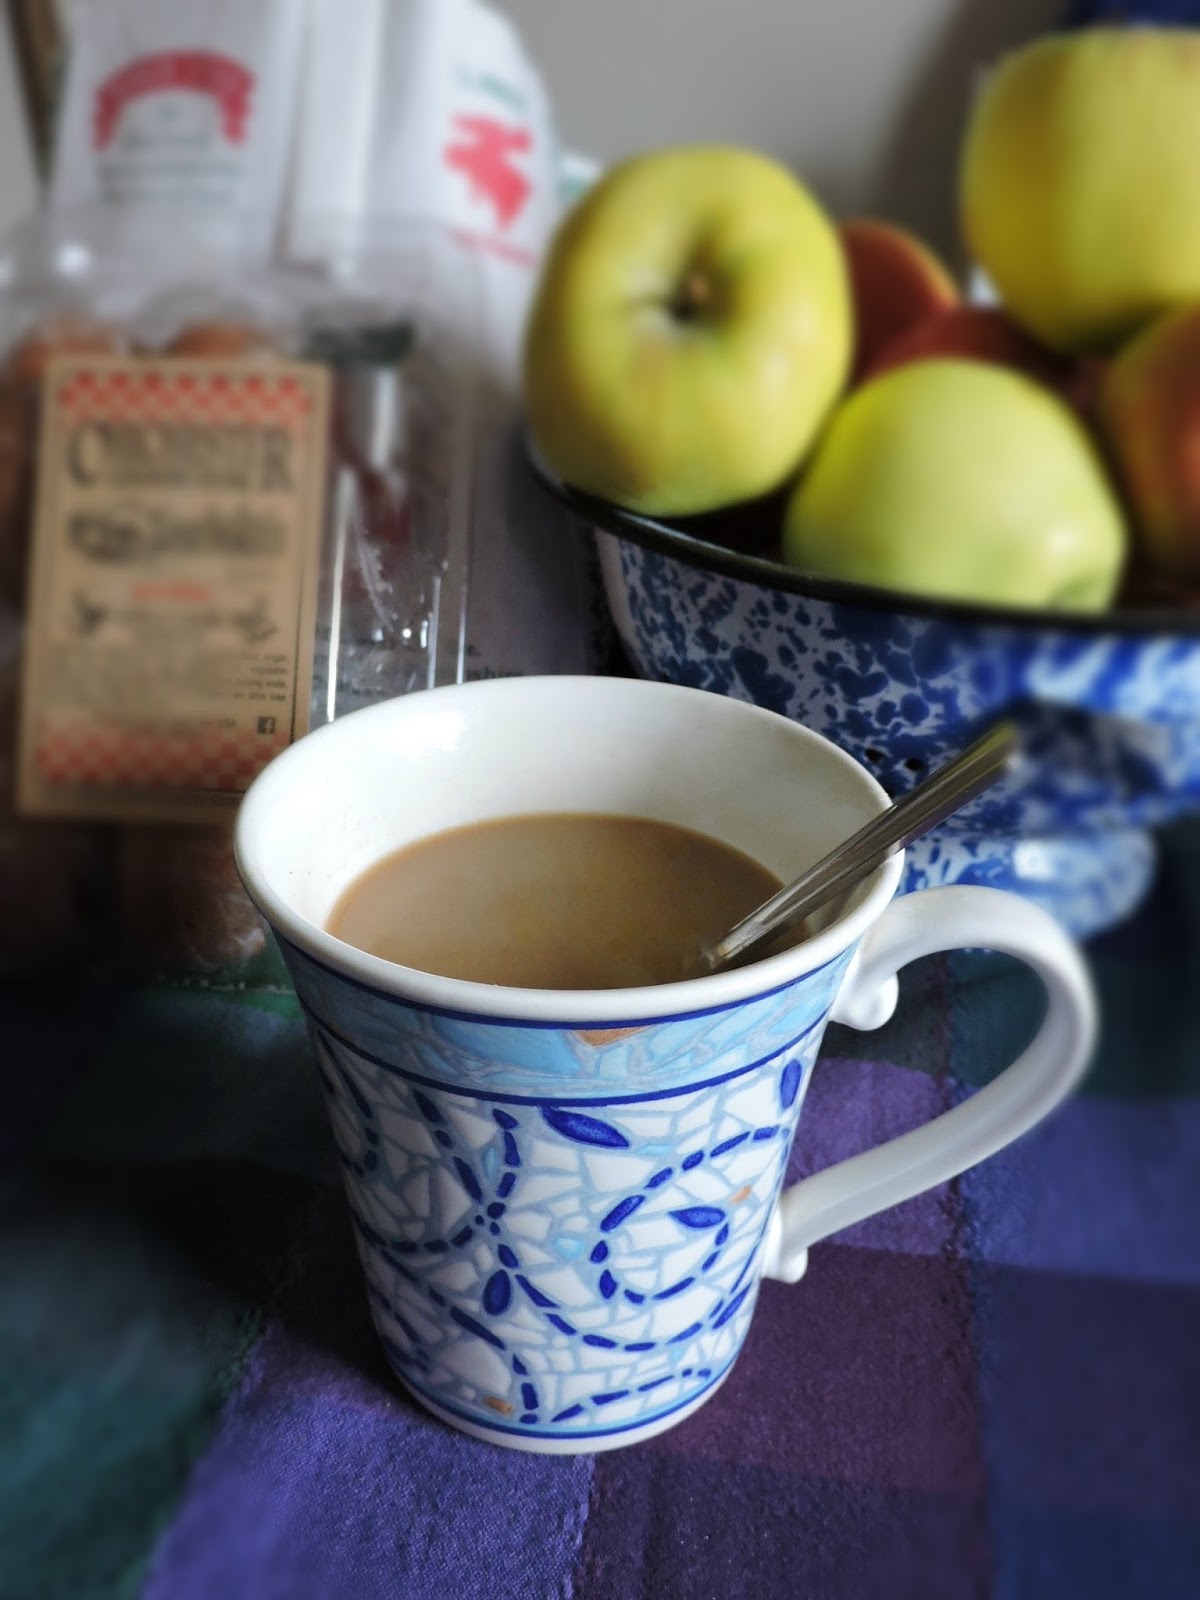 Spiced Ginger Coffee My first Taste of Home Tuesday Recipe & Review!